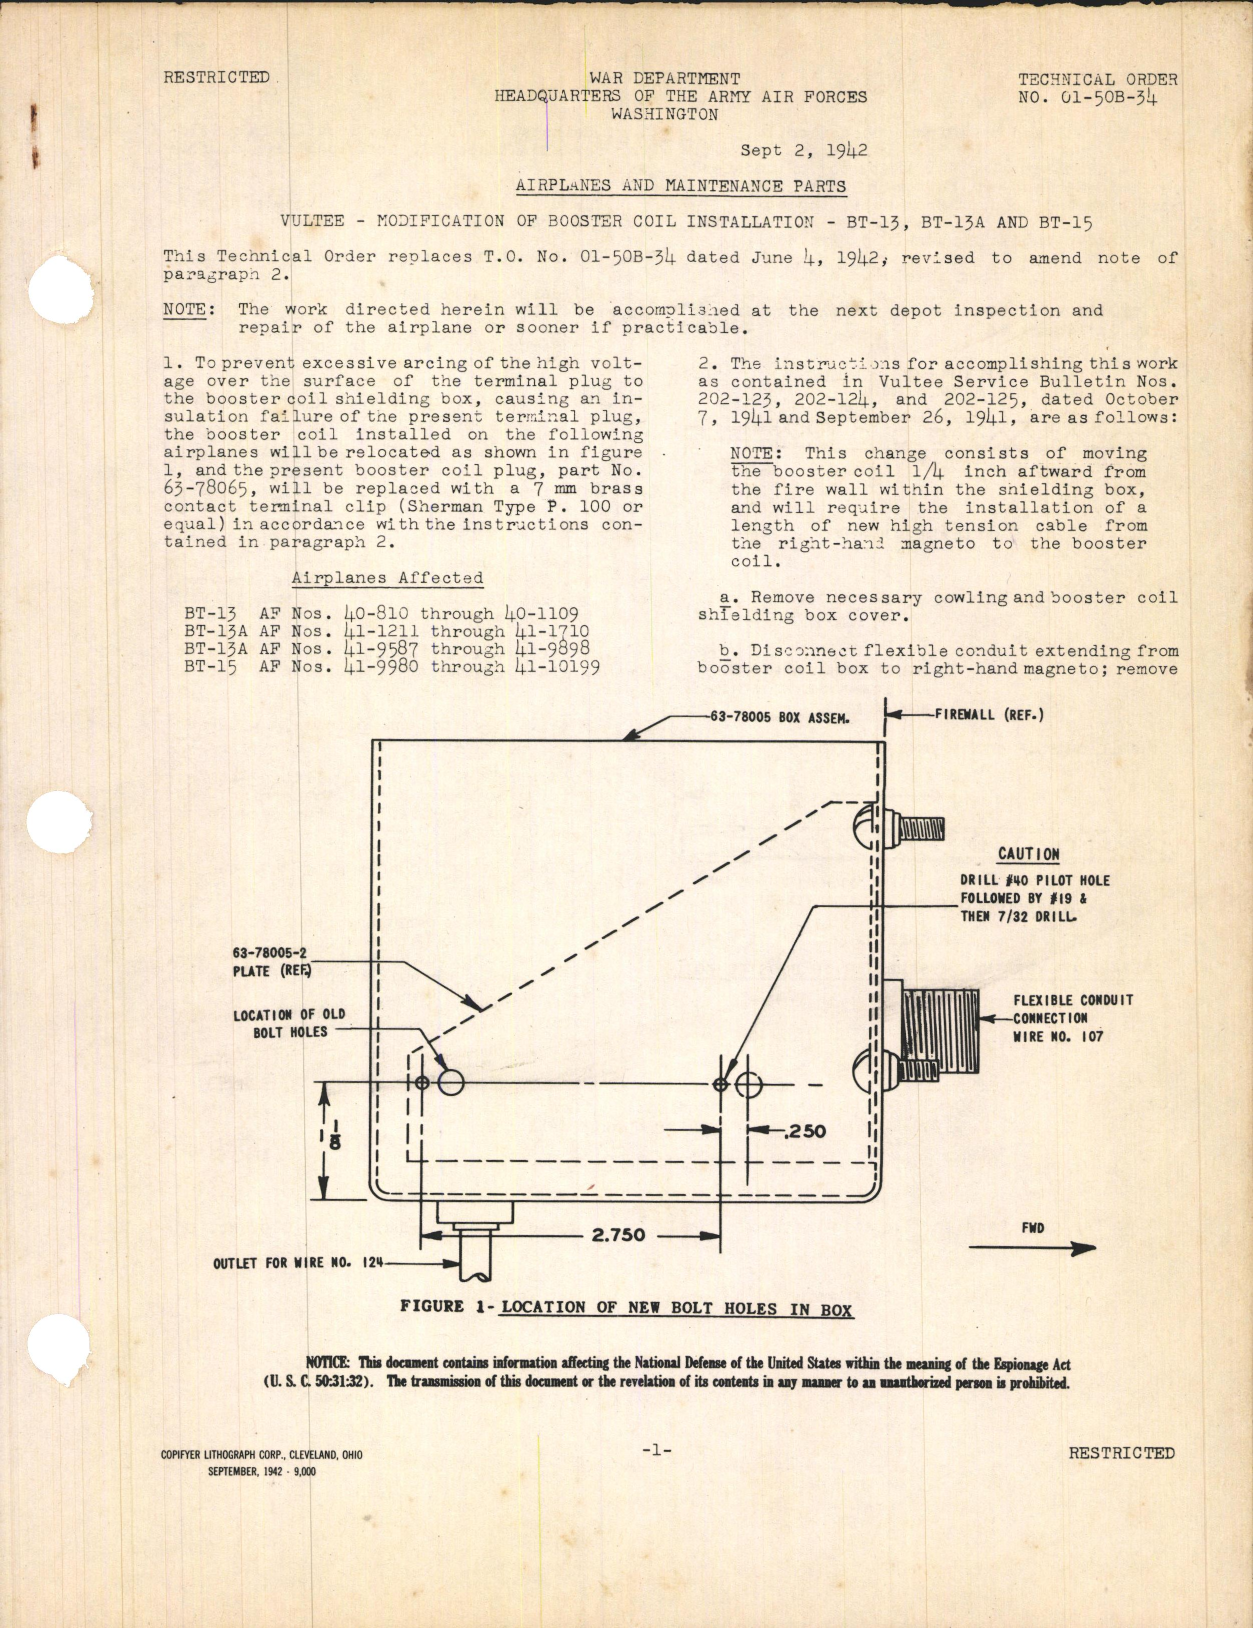 Sample page 1 from AirCorps Library document: Modification of Booster Coil Installation for BT-13, BT-13A, and BT-15